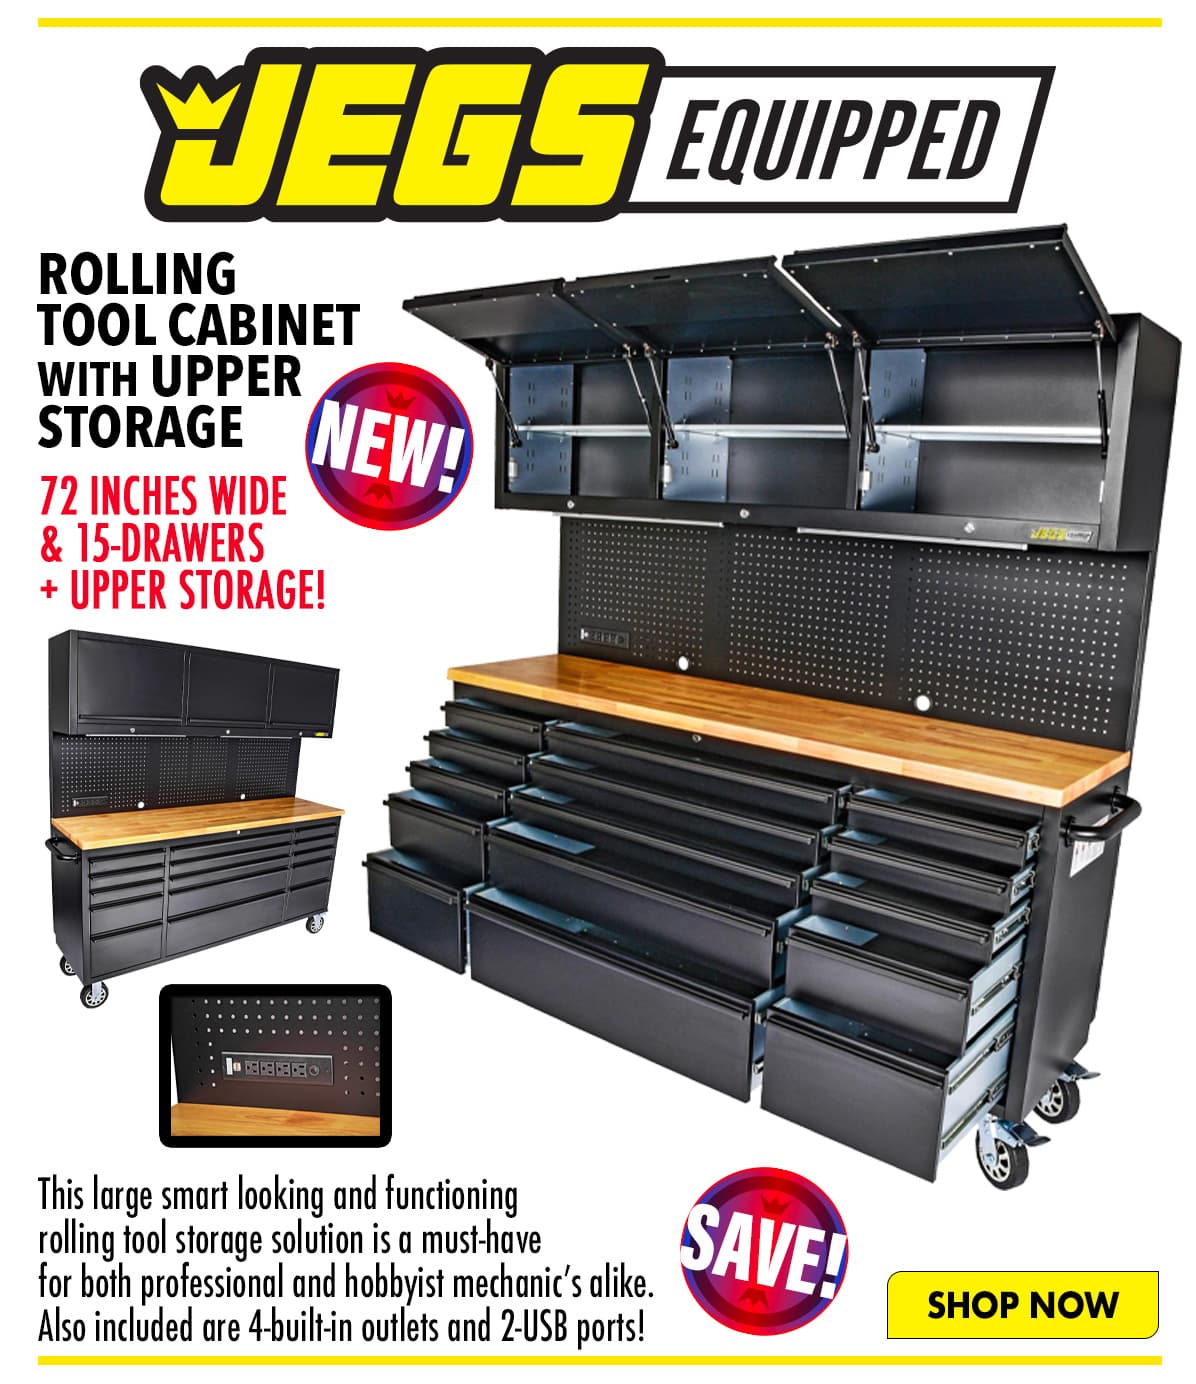 ROLLING TOOL CABINET WITH UPPER STORAGE airis This large smart looking and functioning rolling tool storage solution is a must-have AYi for hoth professional and hobbyist mechanic's alike. g Also included are 4-built-in outlets and 2-USB ports! 